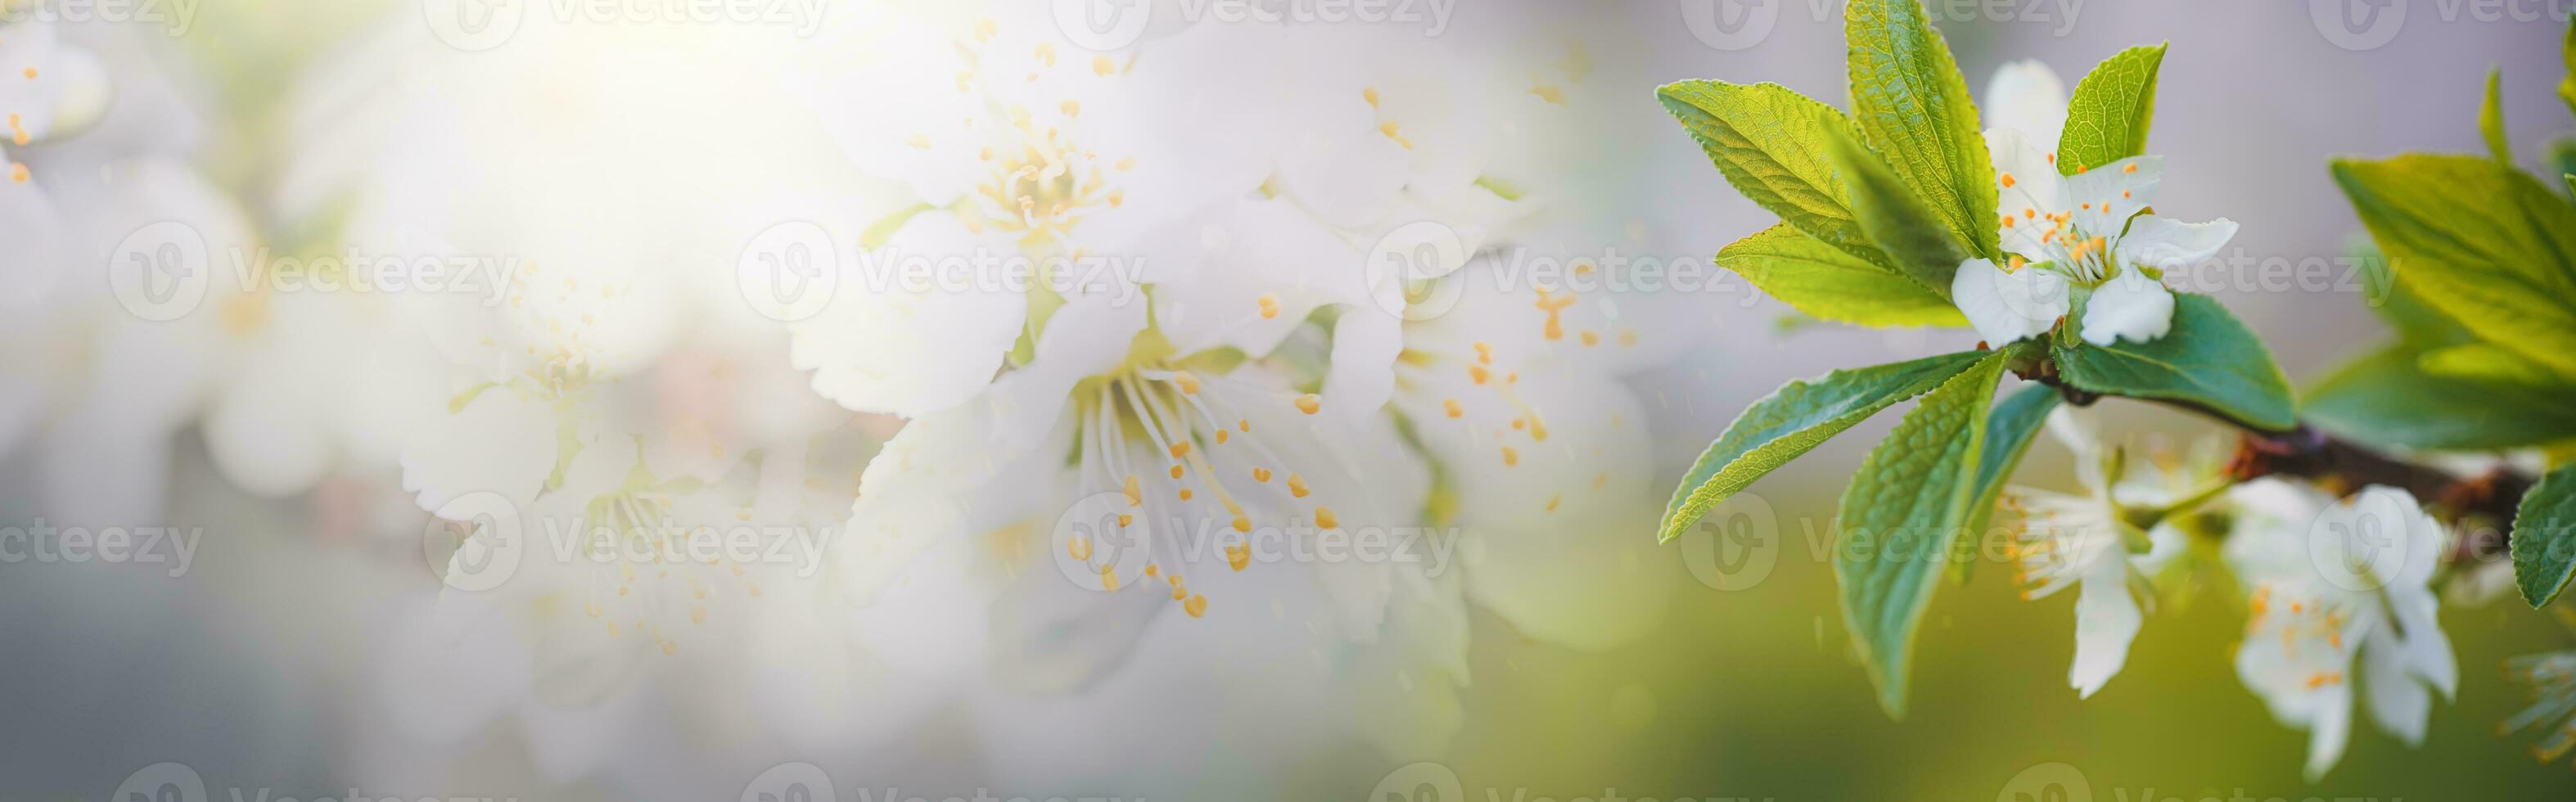 A background with delicate cherry blossoms on a white background with blurred petals and pistils. Prunus tomentosa, Nanjing cherry, Korean cherry, Manchu cherry, downy cherry, Shanghai cherry, Ando cherry, mountain cherry, Chinese bush cherry, and Chinese photo